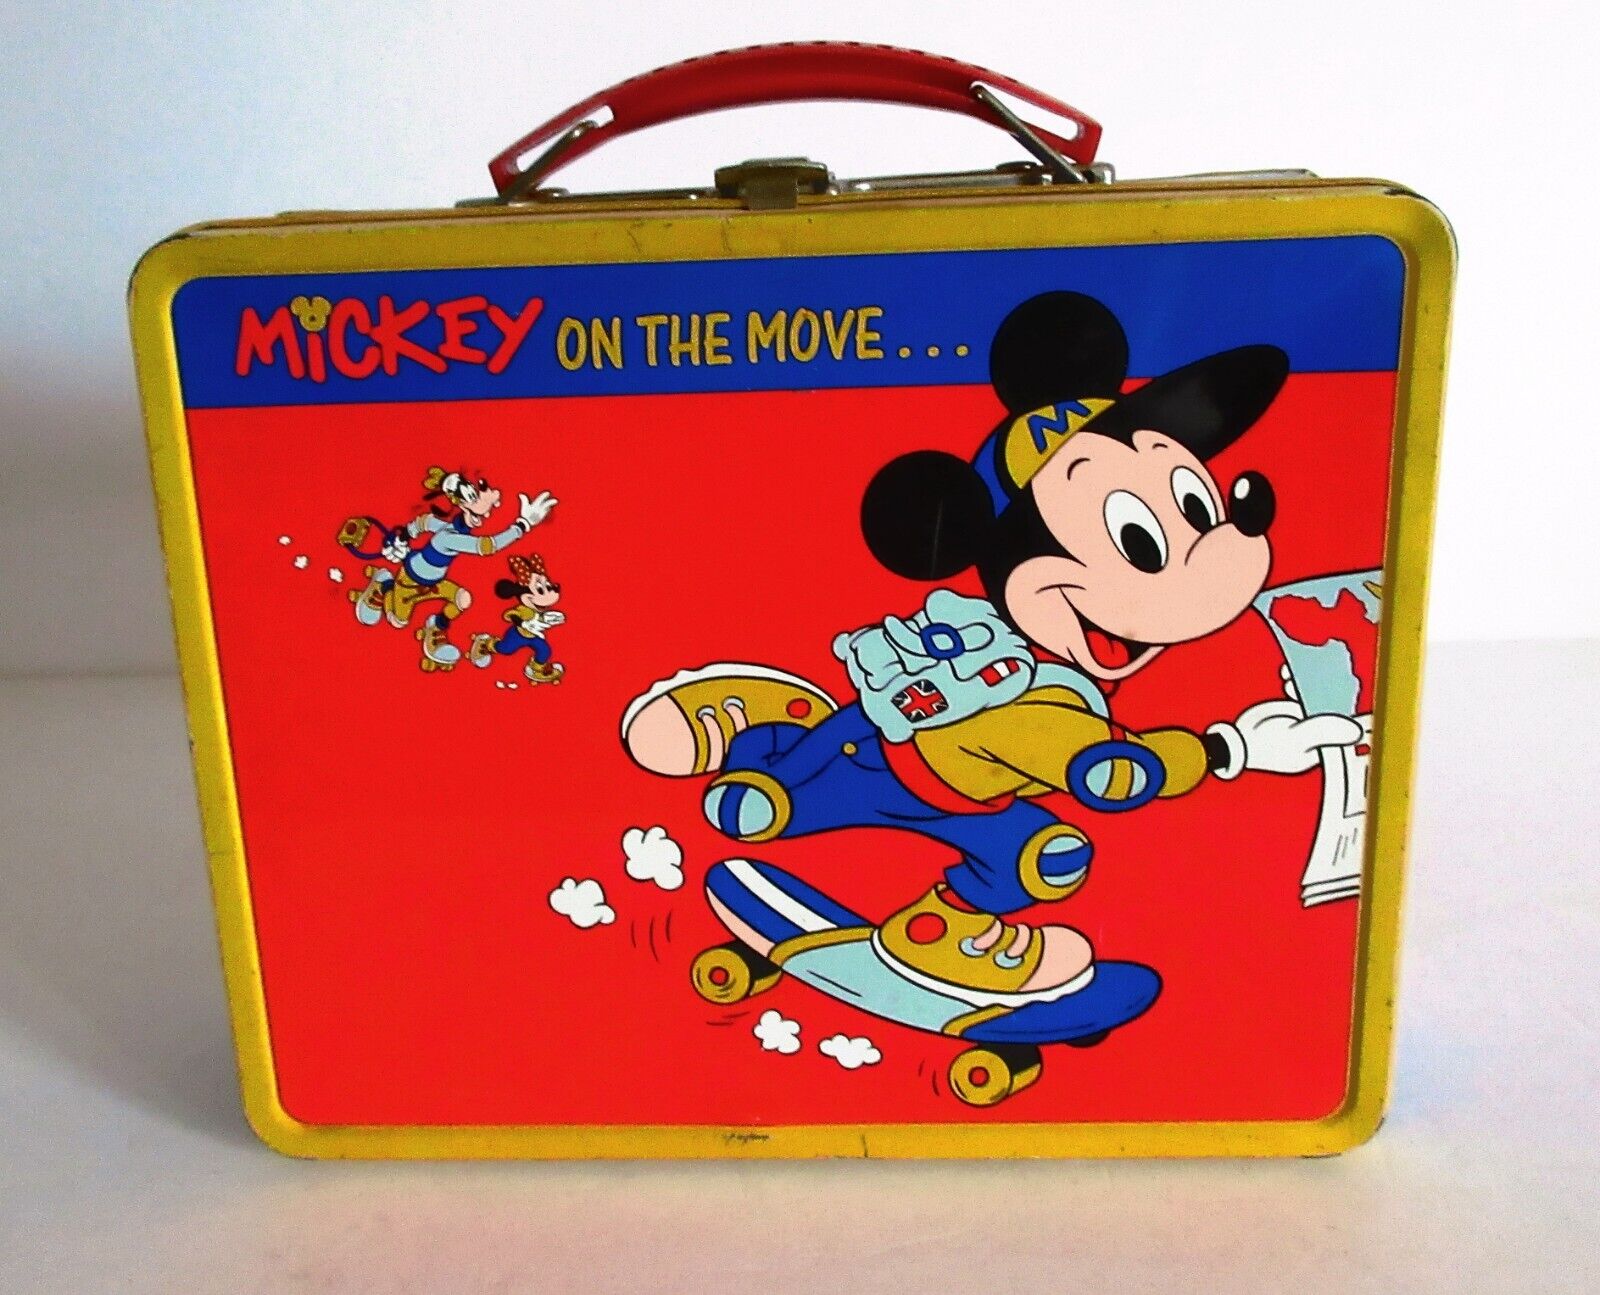 1981 Rare R19 France issue Mickey on the Move Lunchbox by Sorfim France Wow 